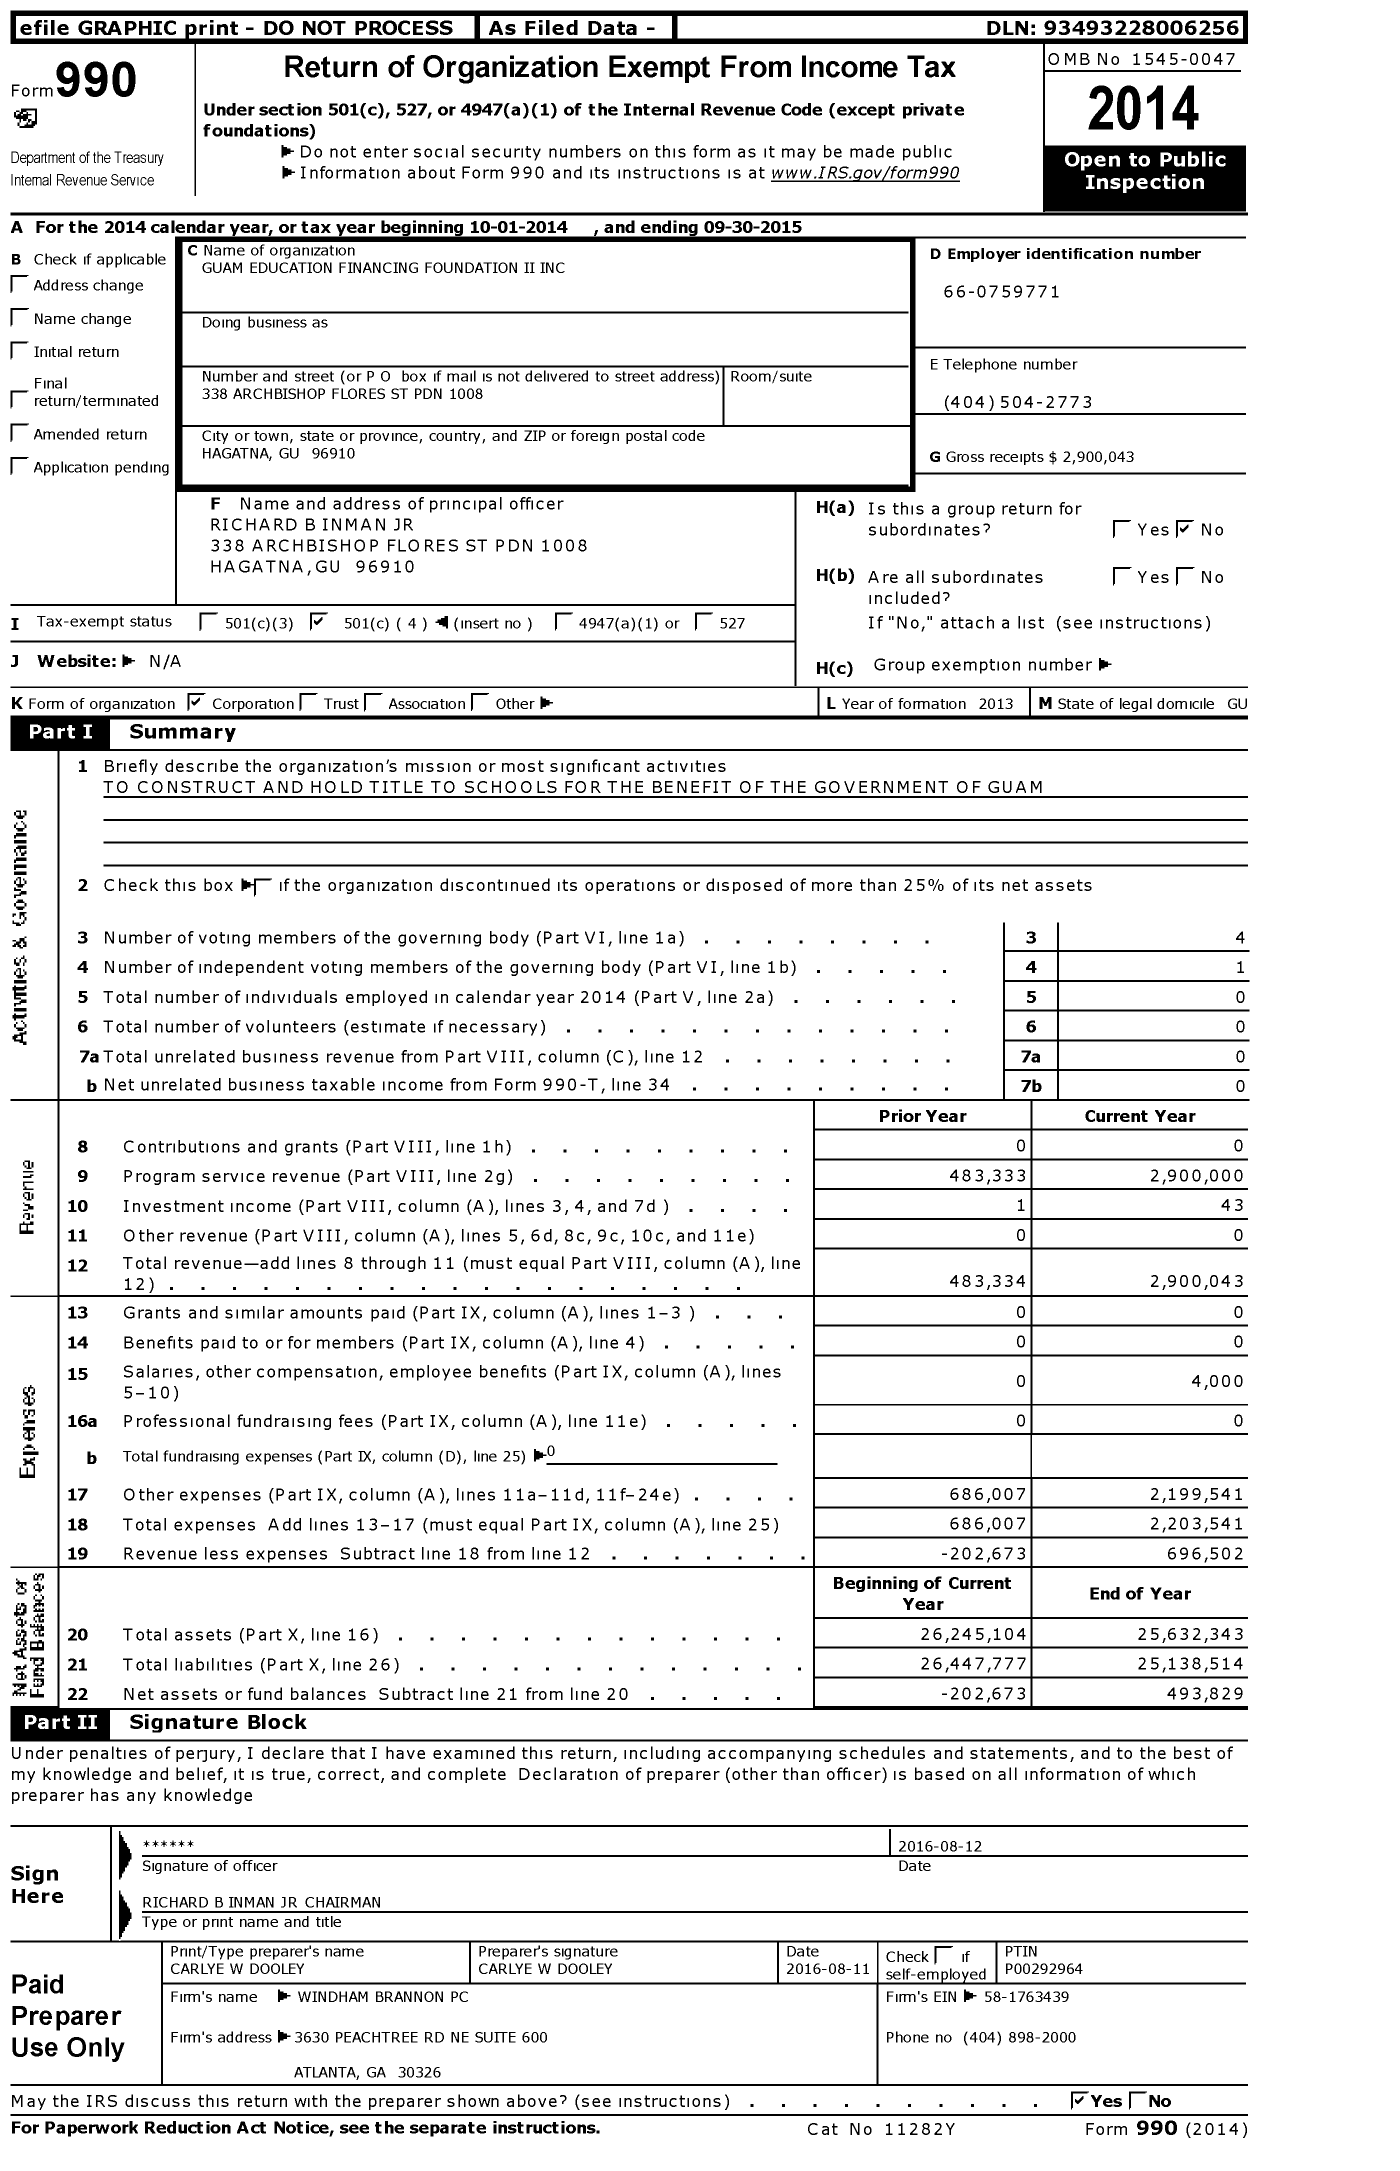 Image of first page of 2014 Form 990O for Guam Education Financing Foundation Ii